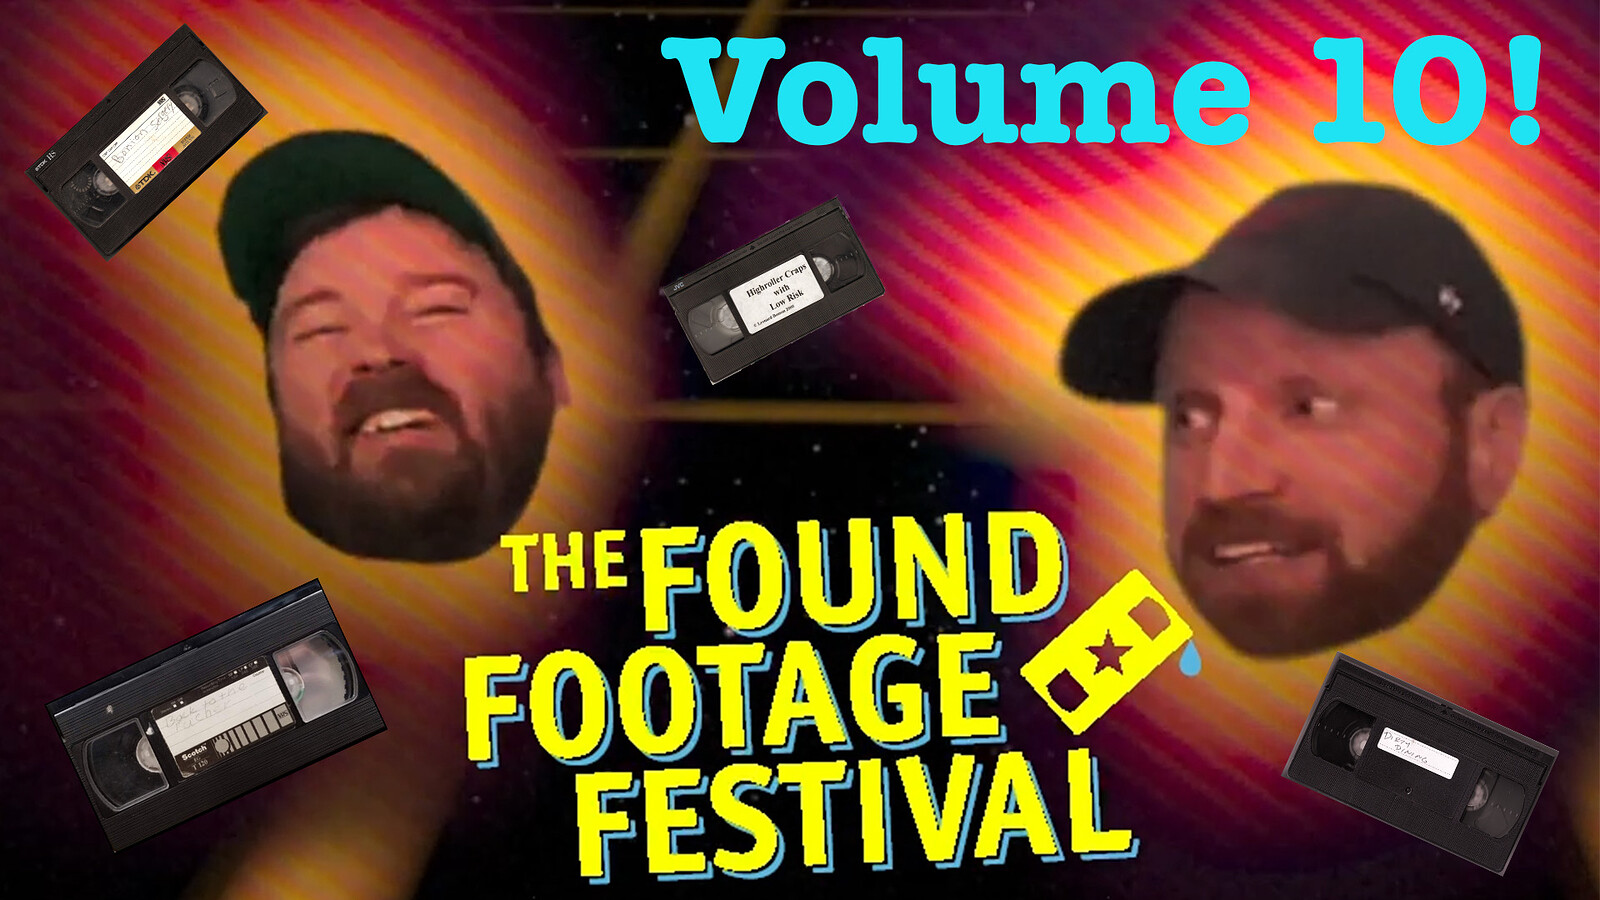 Found Footage Festival vol 10 at The former Bristol IMAX